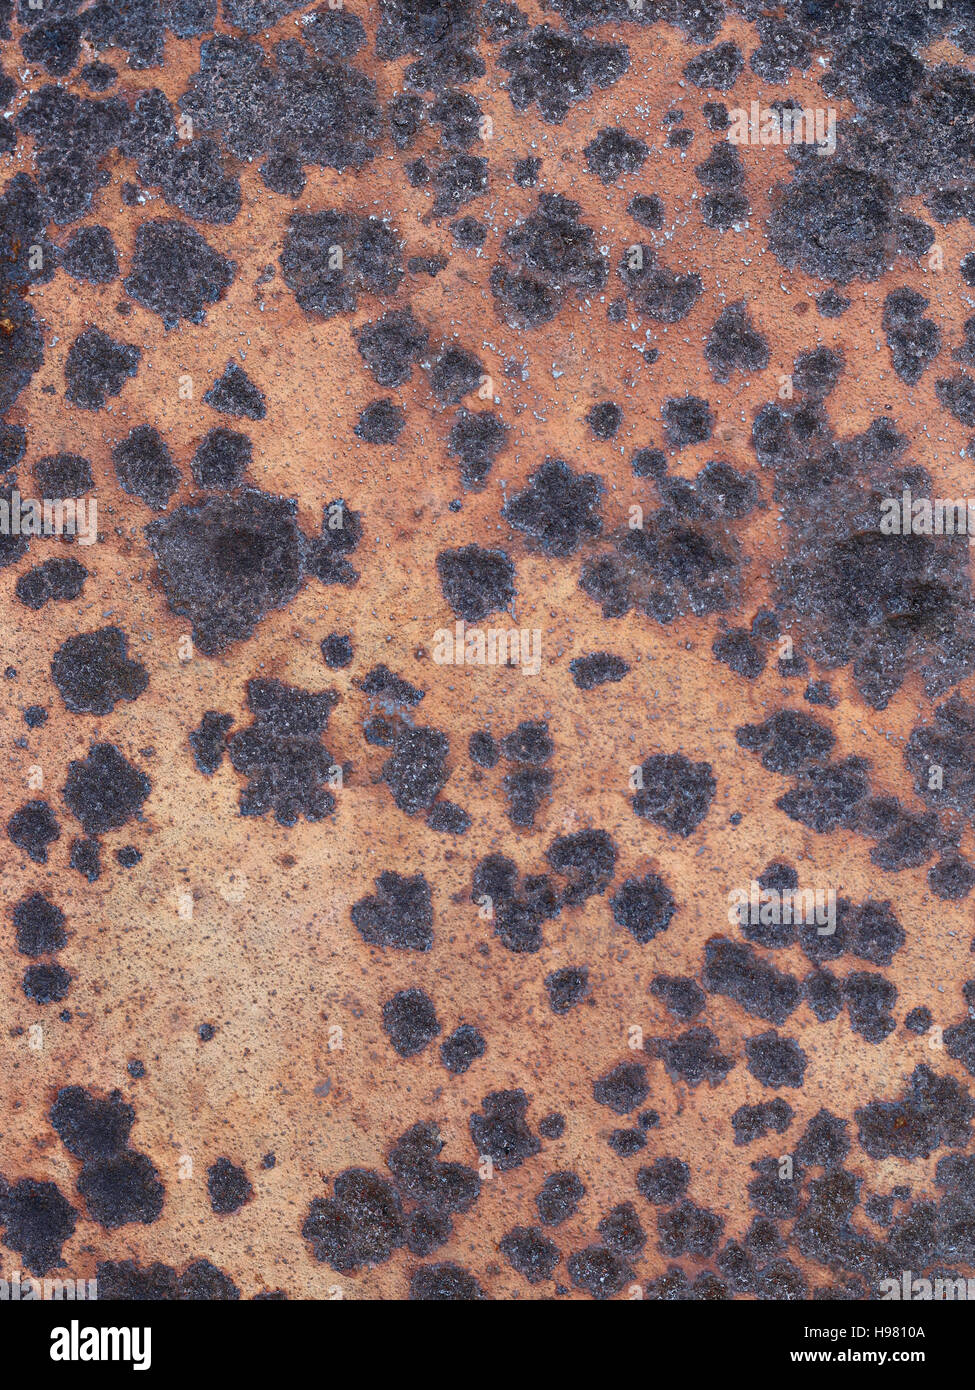 Detail of the rusty and worn surface of the iron plate Stock Photo